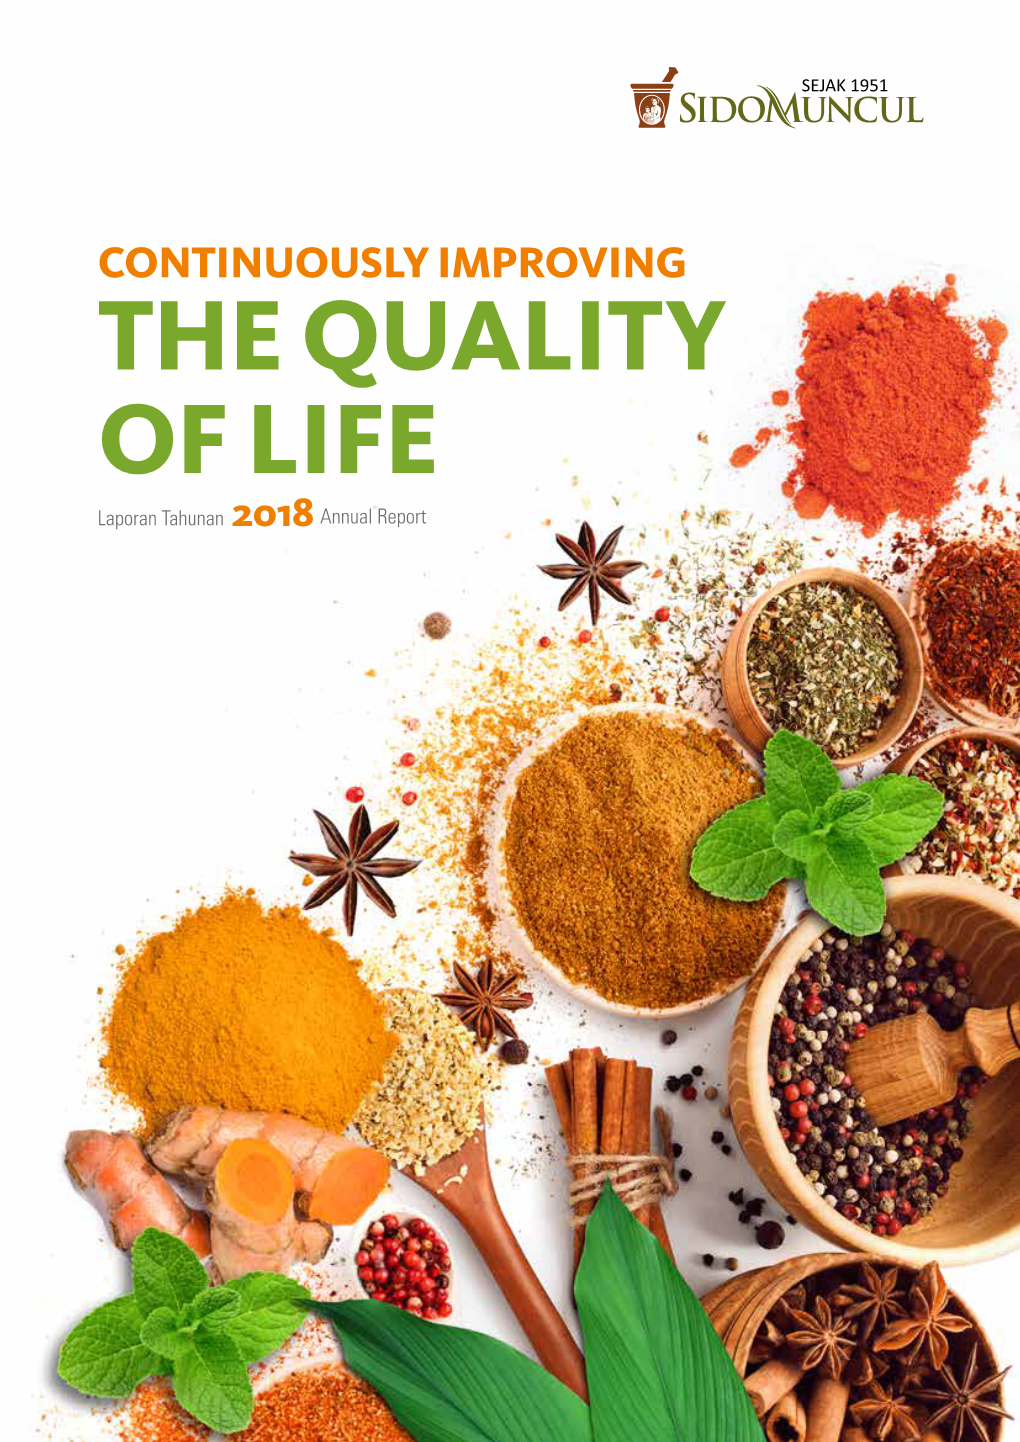 THE QUALITY of LIFE the QUALITY of LIFE Laporan Tahunan 2018 Annual Report CONTINUOUSLY IMPROVING the QUALITY of LIFE